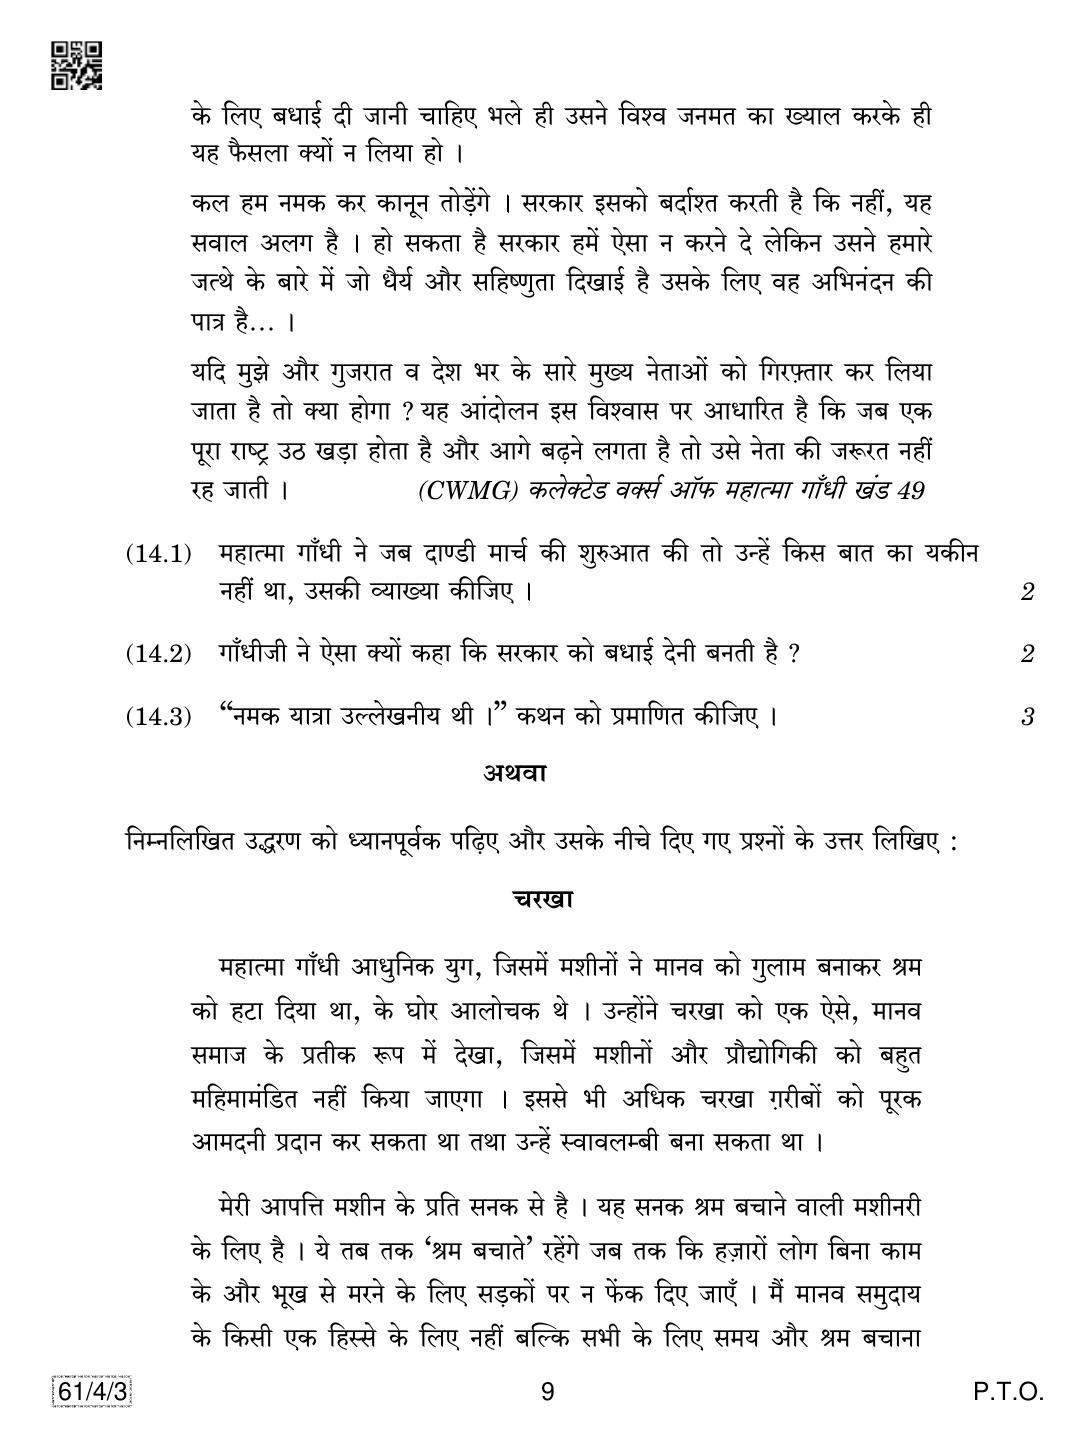 CBSE Class 12 61-4-3 History 2019 Question Paper - Page 9